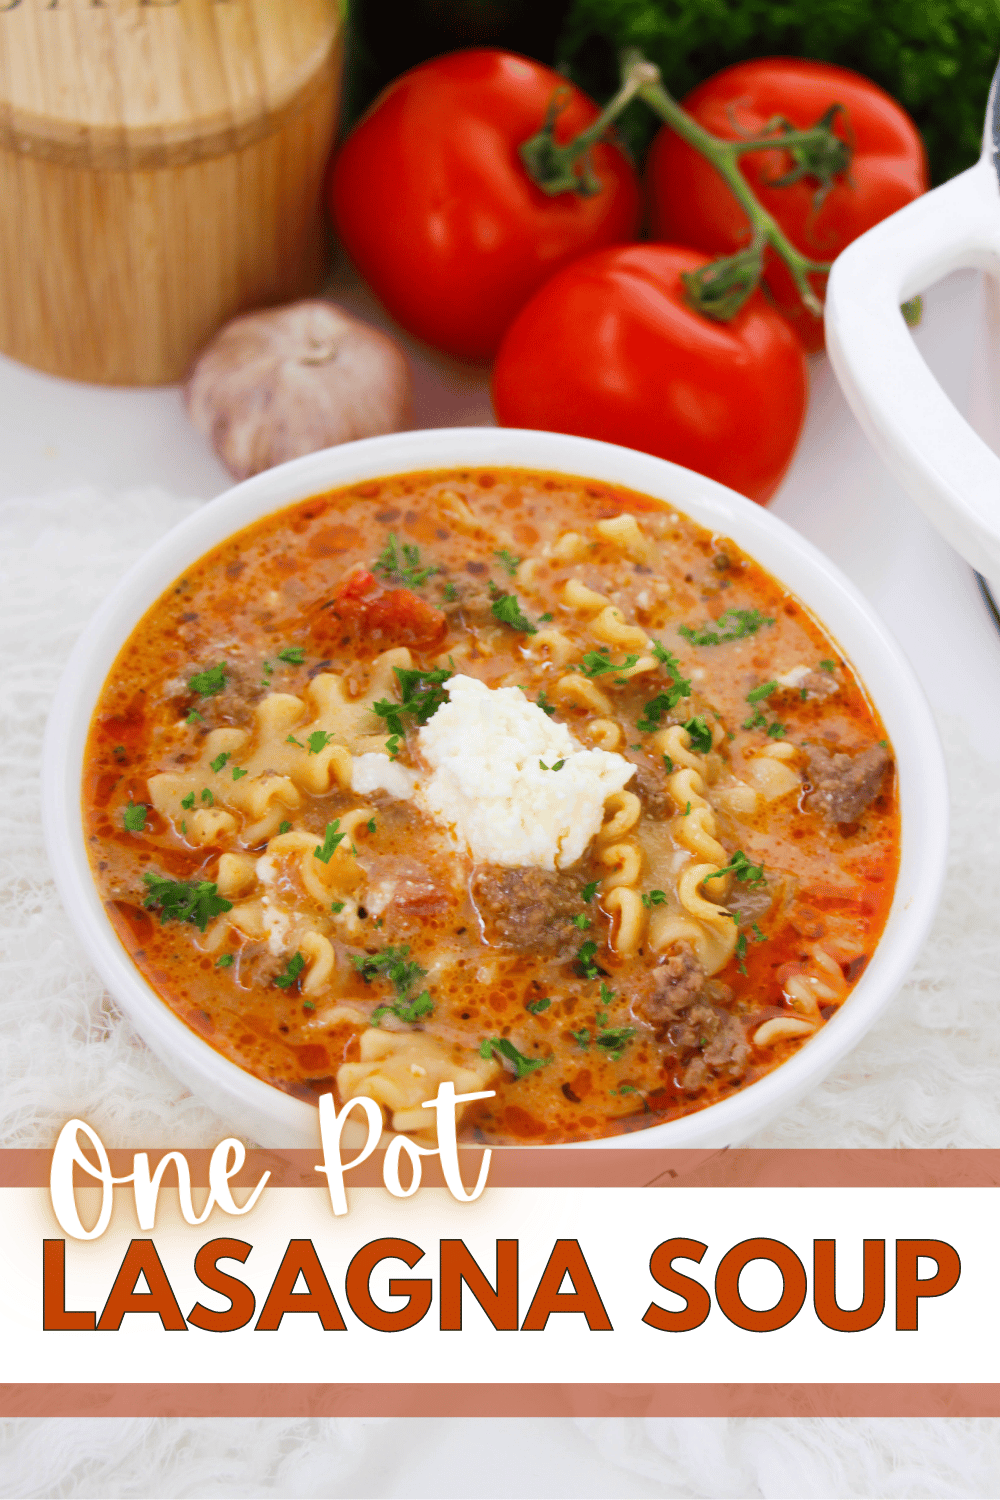 This One Pot Lasagna Soup is a comforting and easy dinner that is ready in 30 minutes. It’s flavorful and hearty, perfect on busy nights. #onepotlasagnasoup #onepotmeal #lasagnasoup #lasagna #soup via @wondermomwannab